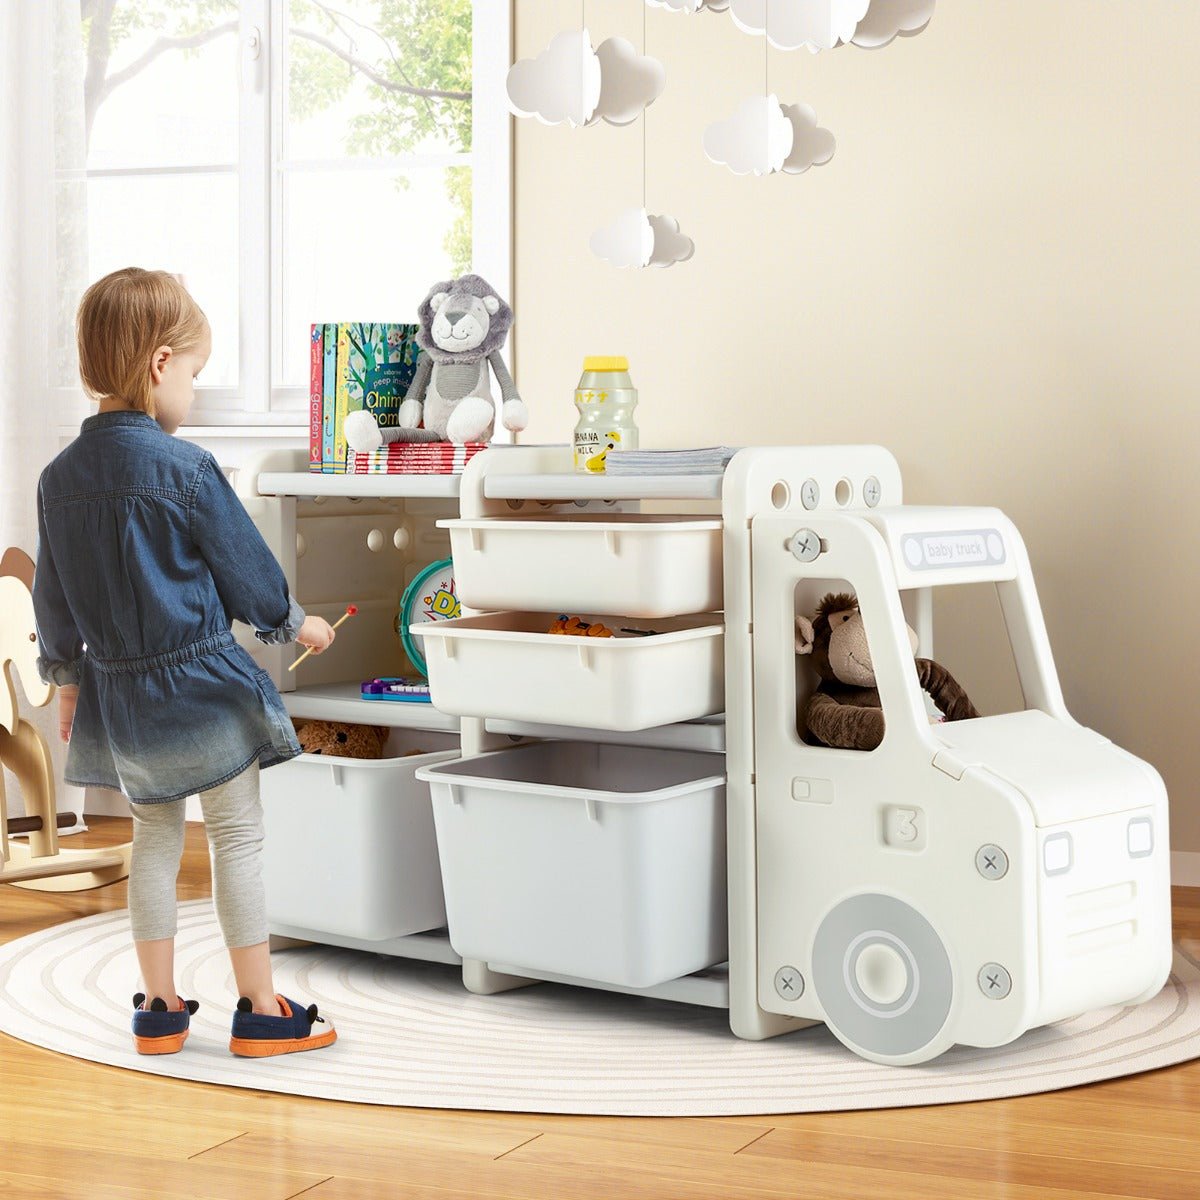 Enhance Playtime with the Grey Truck Shaped Storage Cabinet - Buy Now!